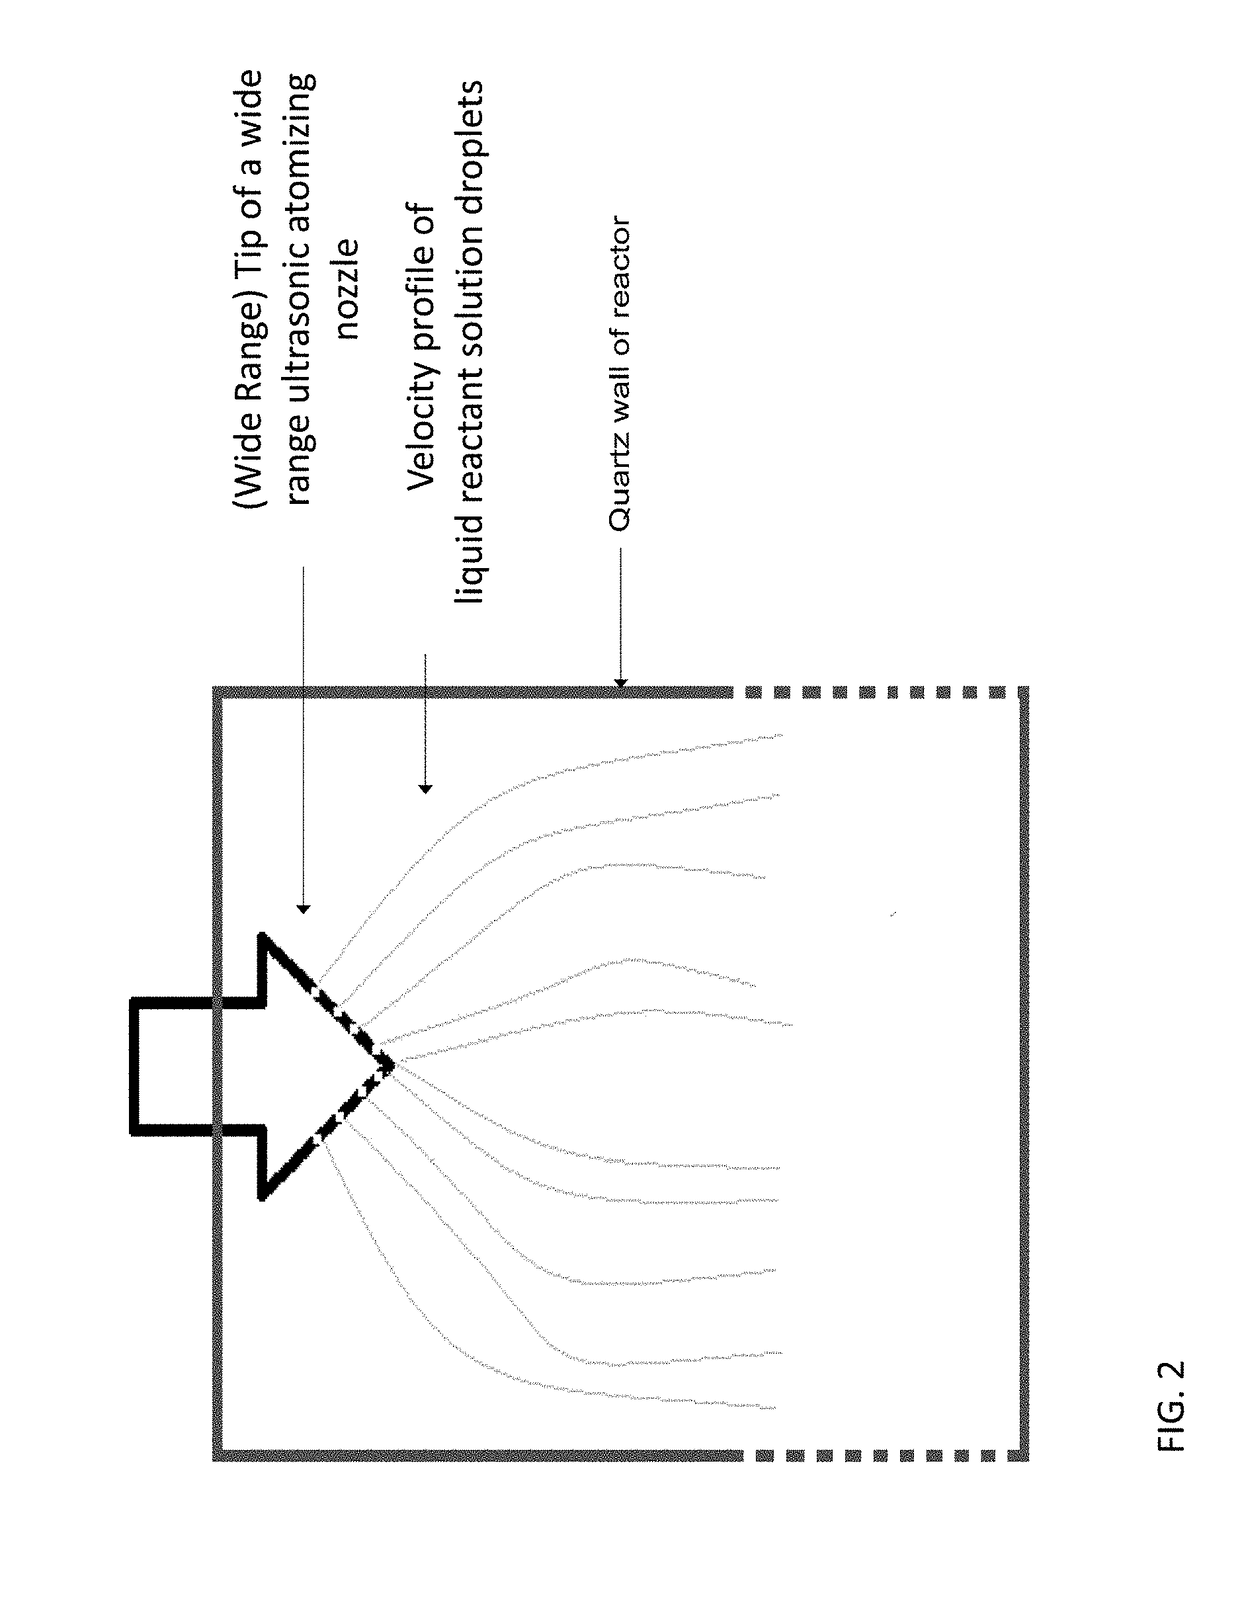 Chemical vapor deposition reactor with preheating, reaction, and cooling zones